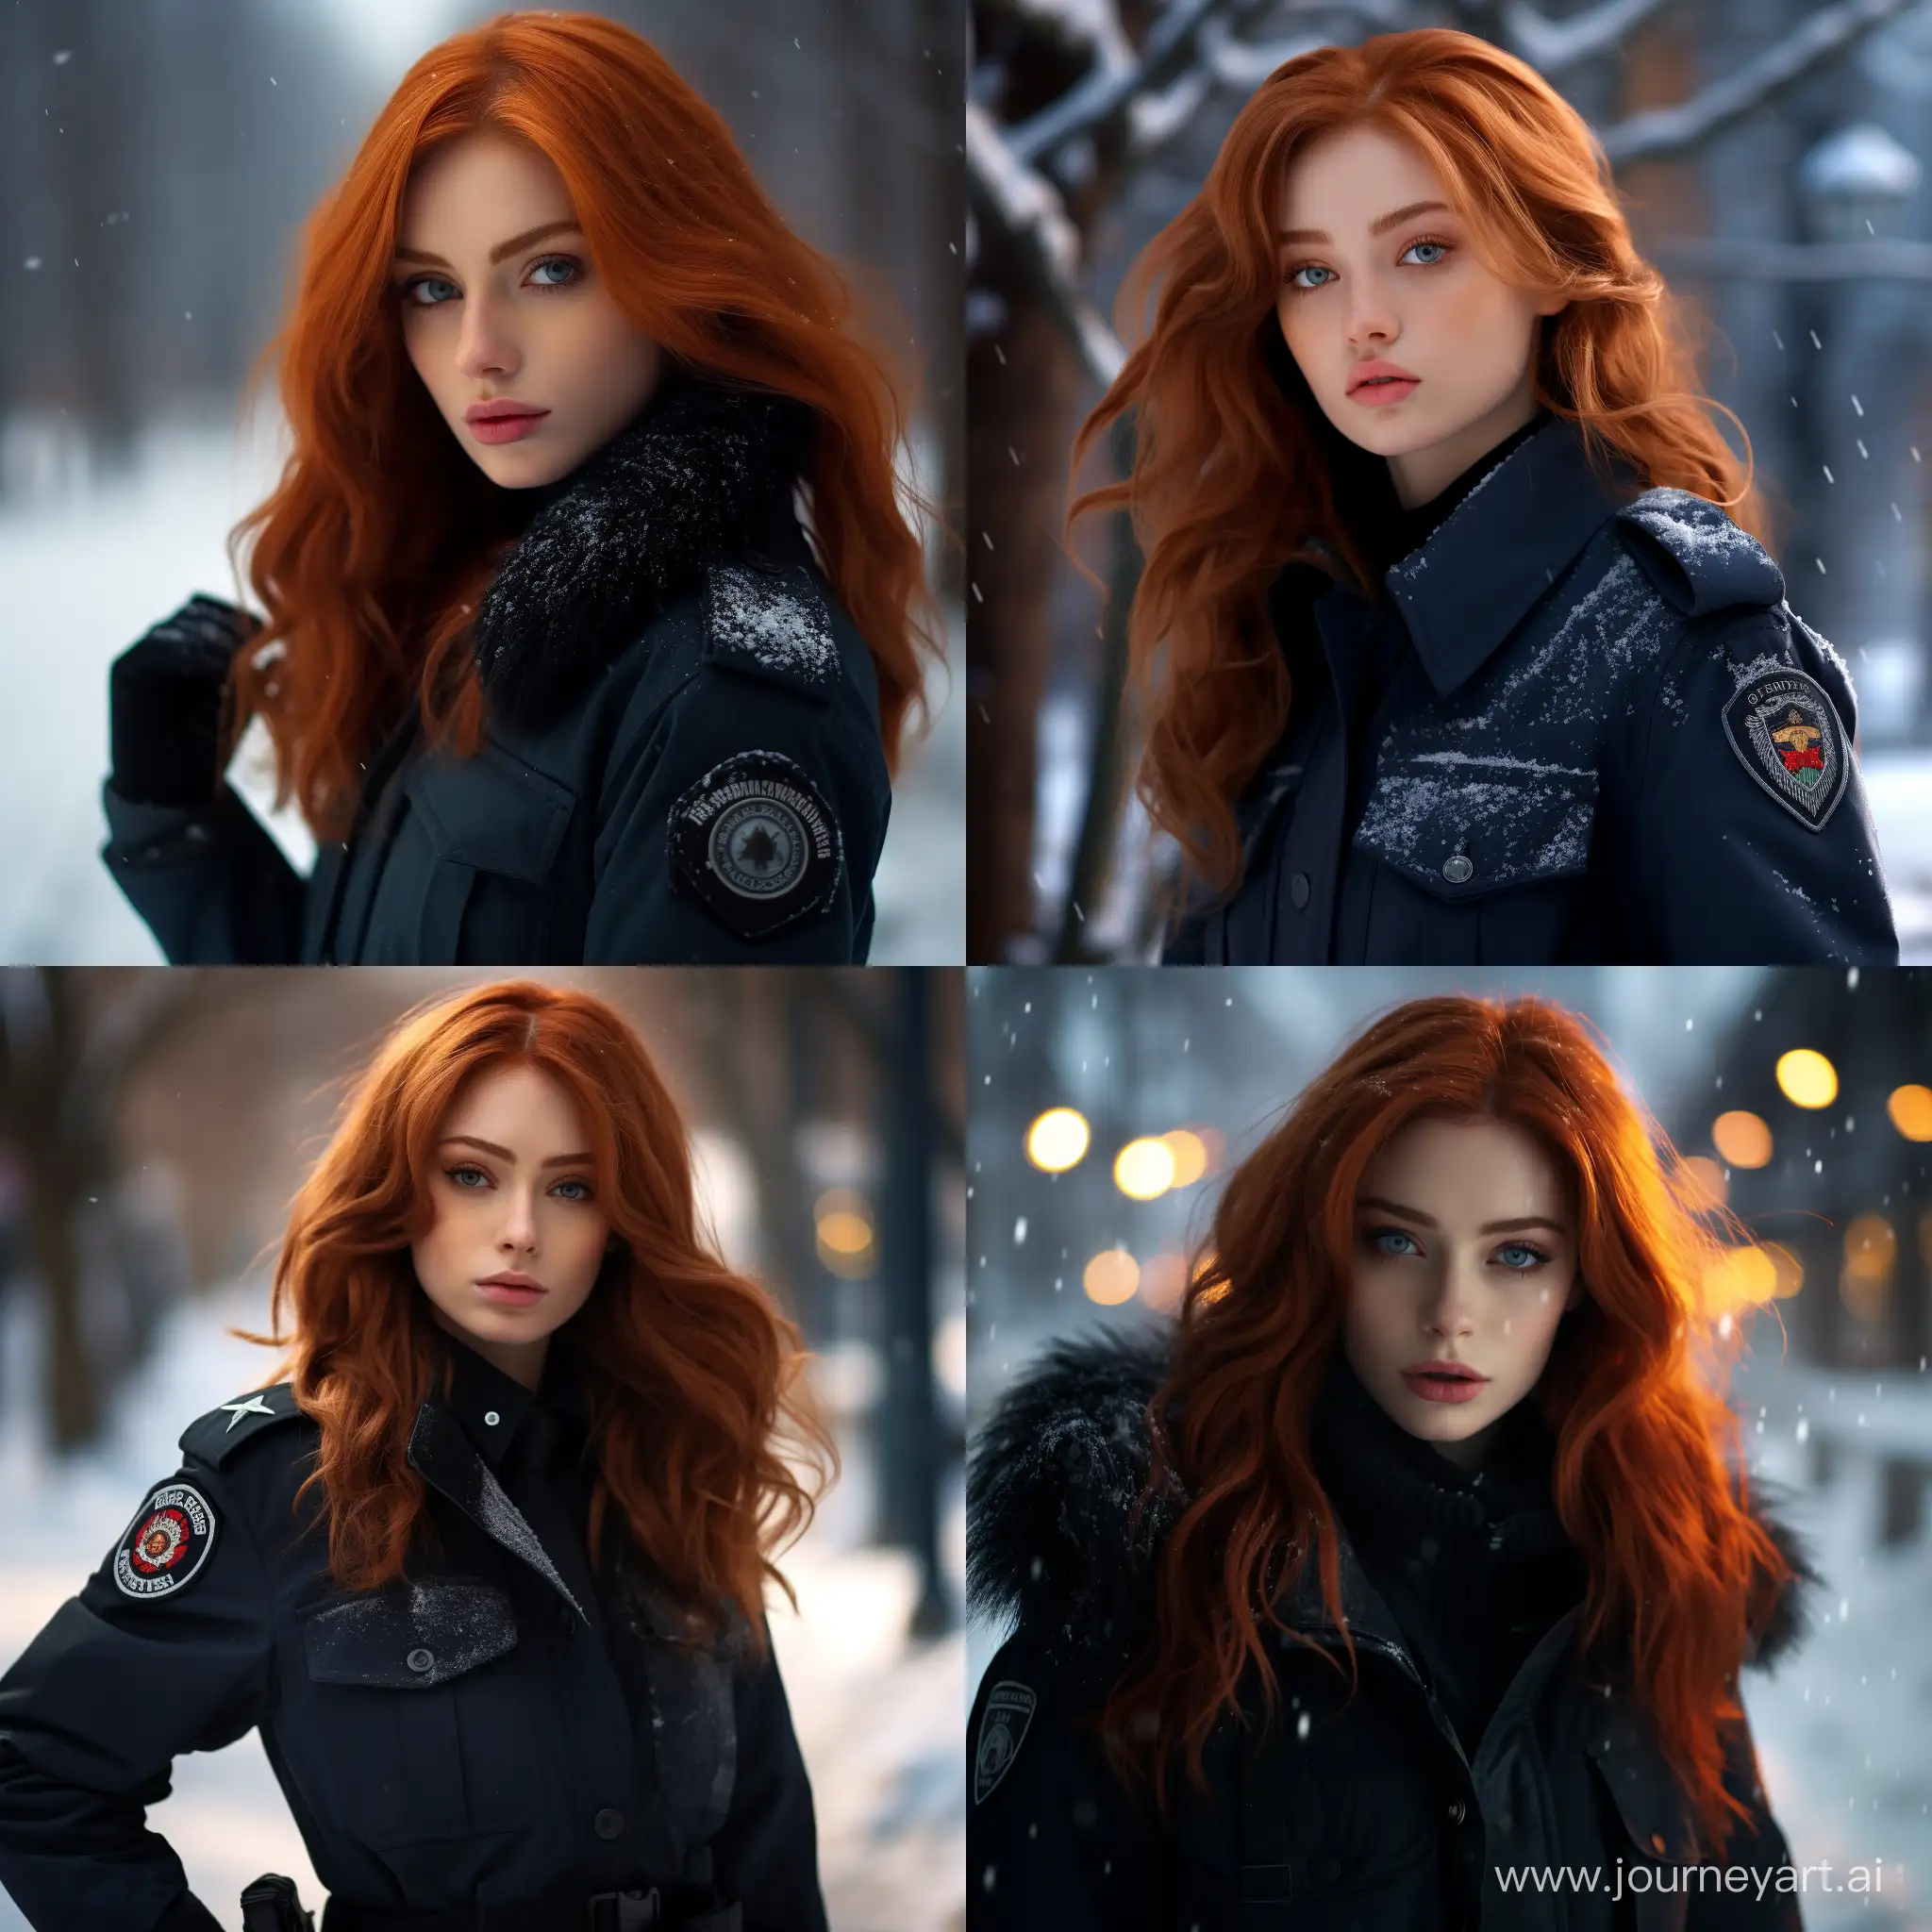 RedHaired-Girl-in-Winter-Police-Uniform